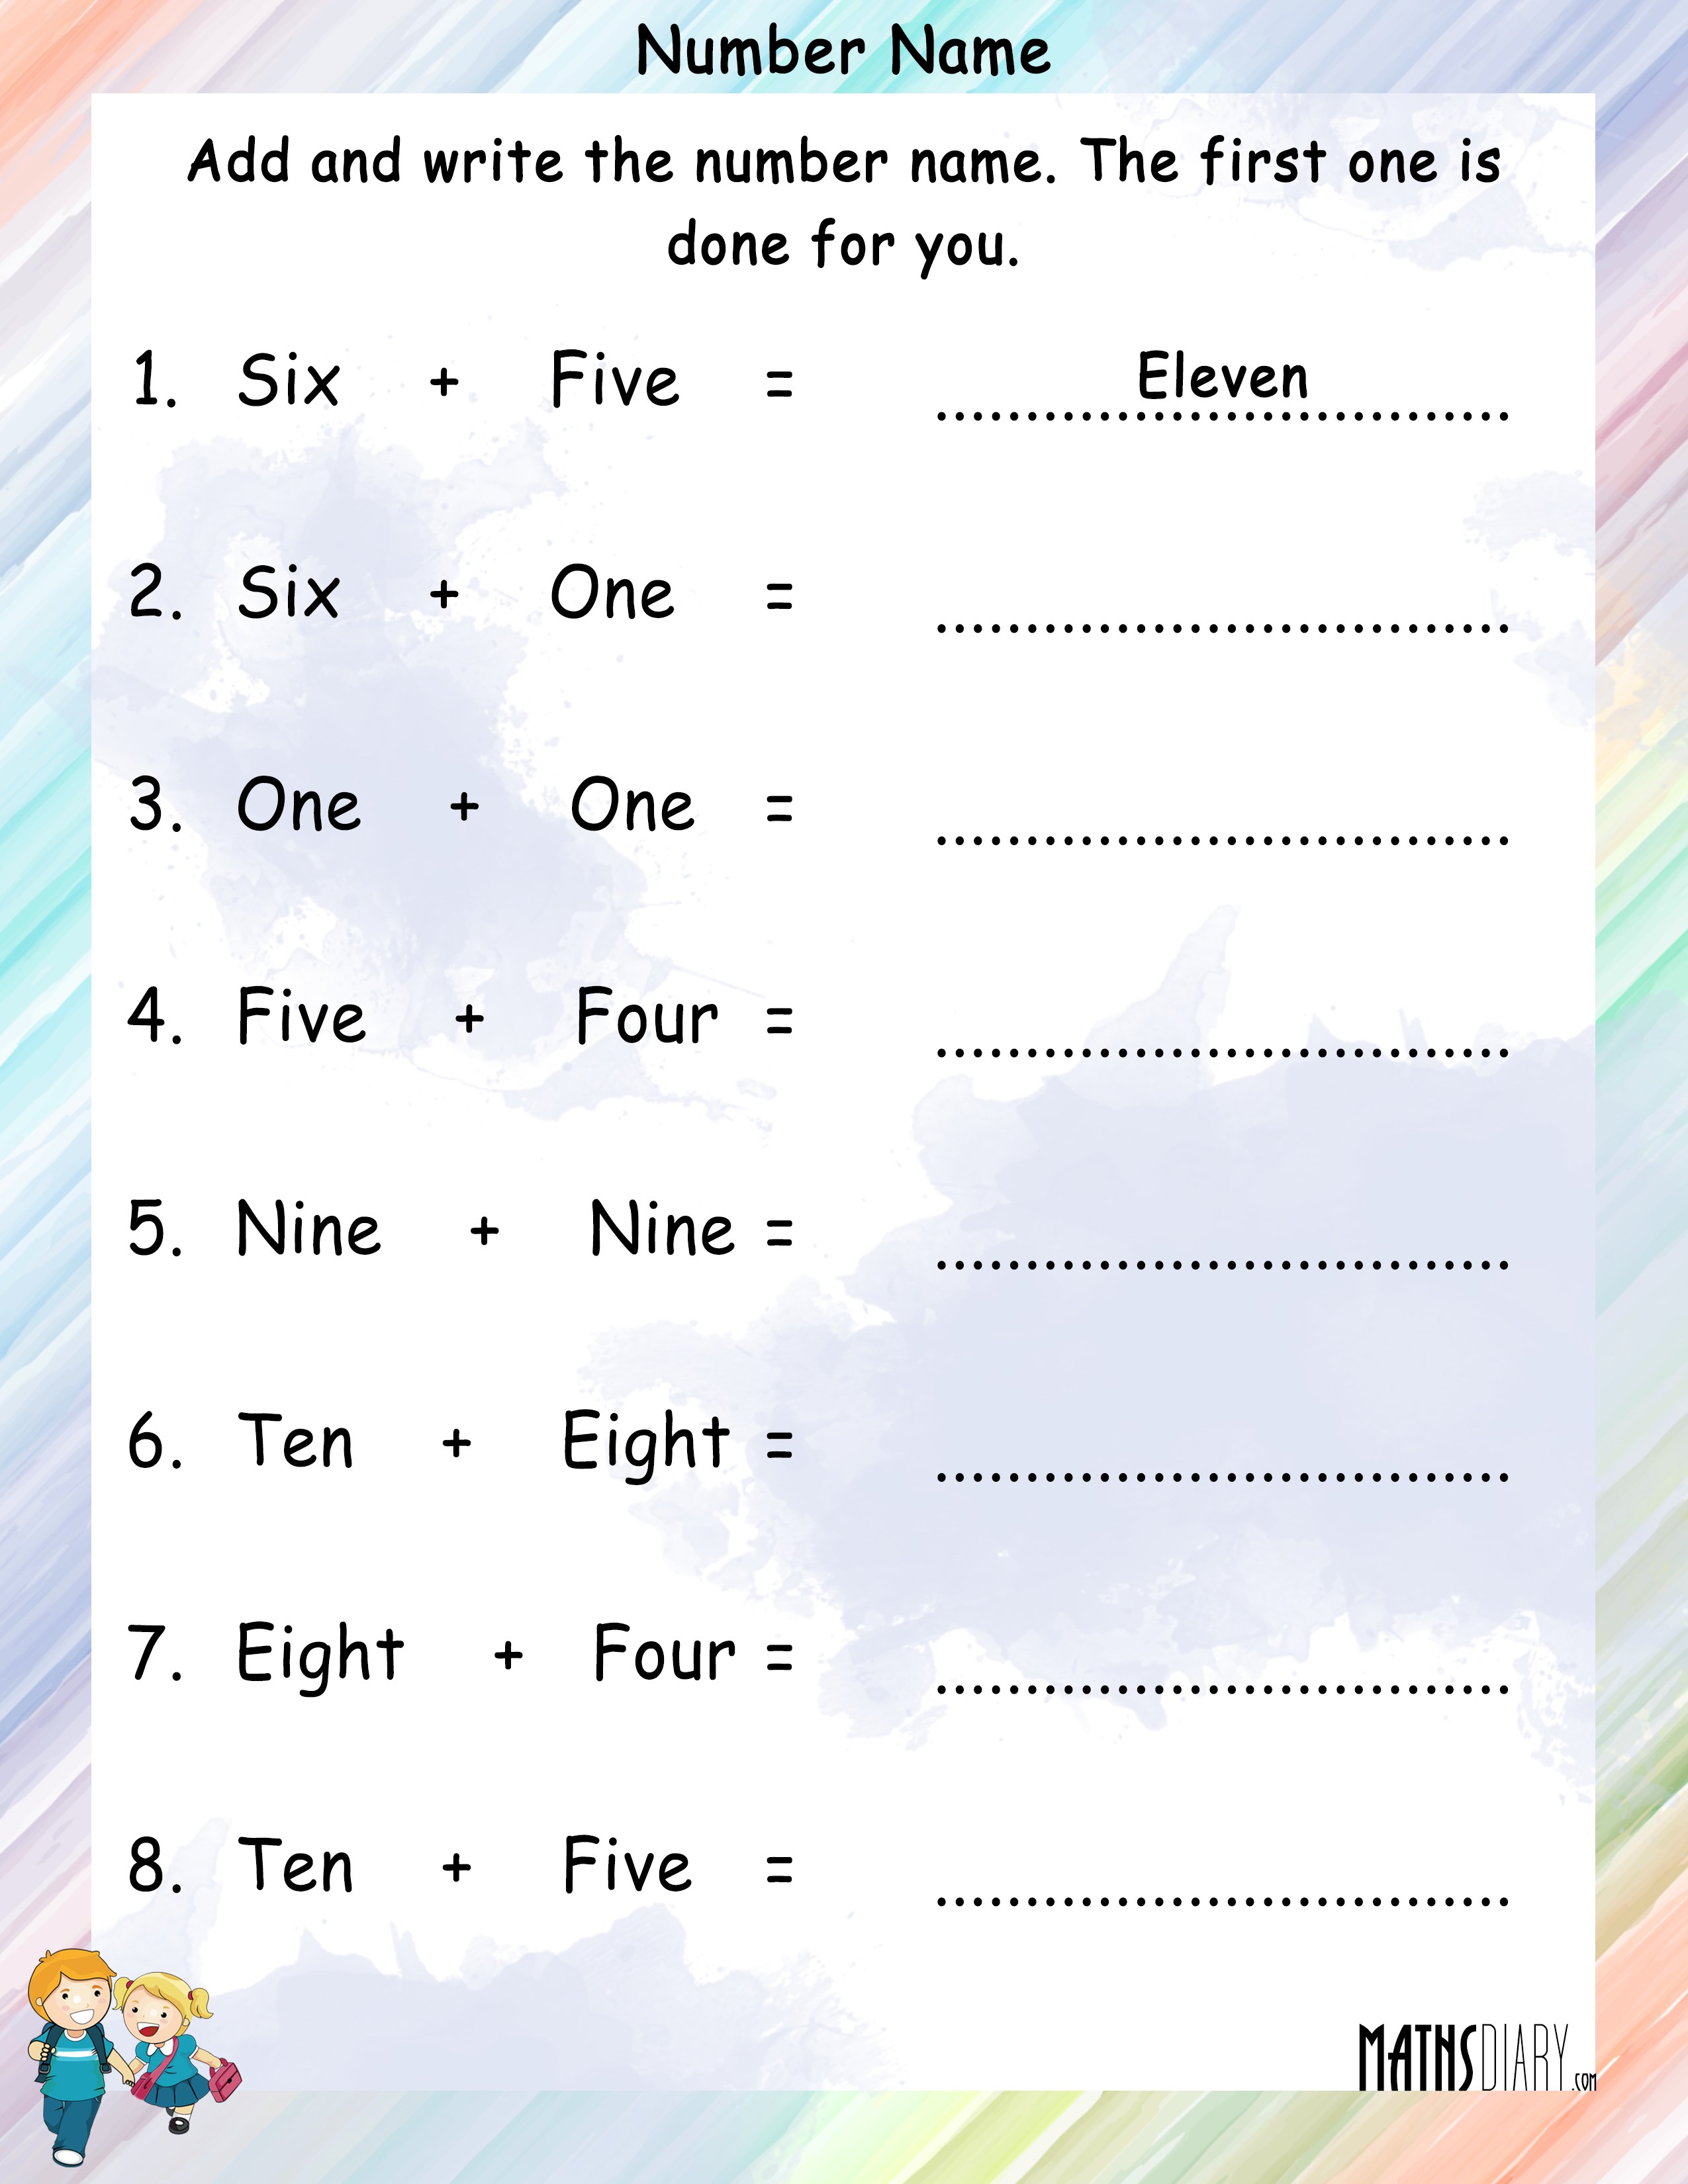 add the number names and write answer in number name math worksheets mathsdiary com